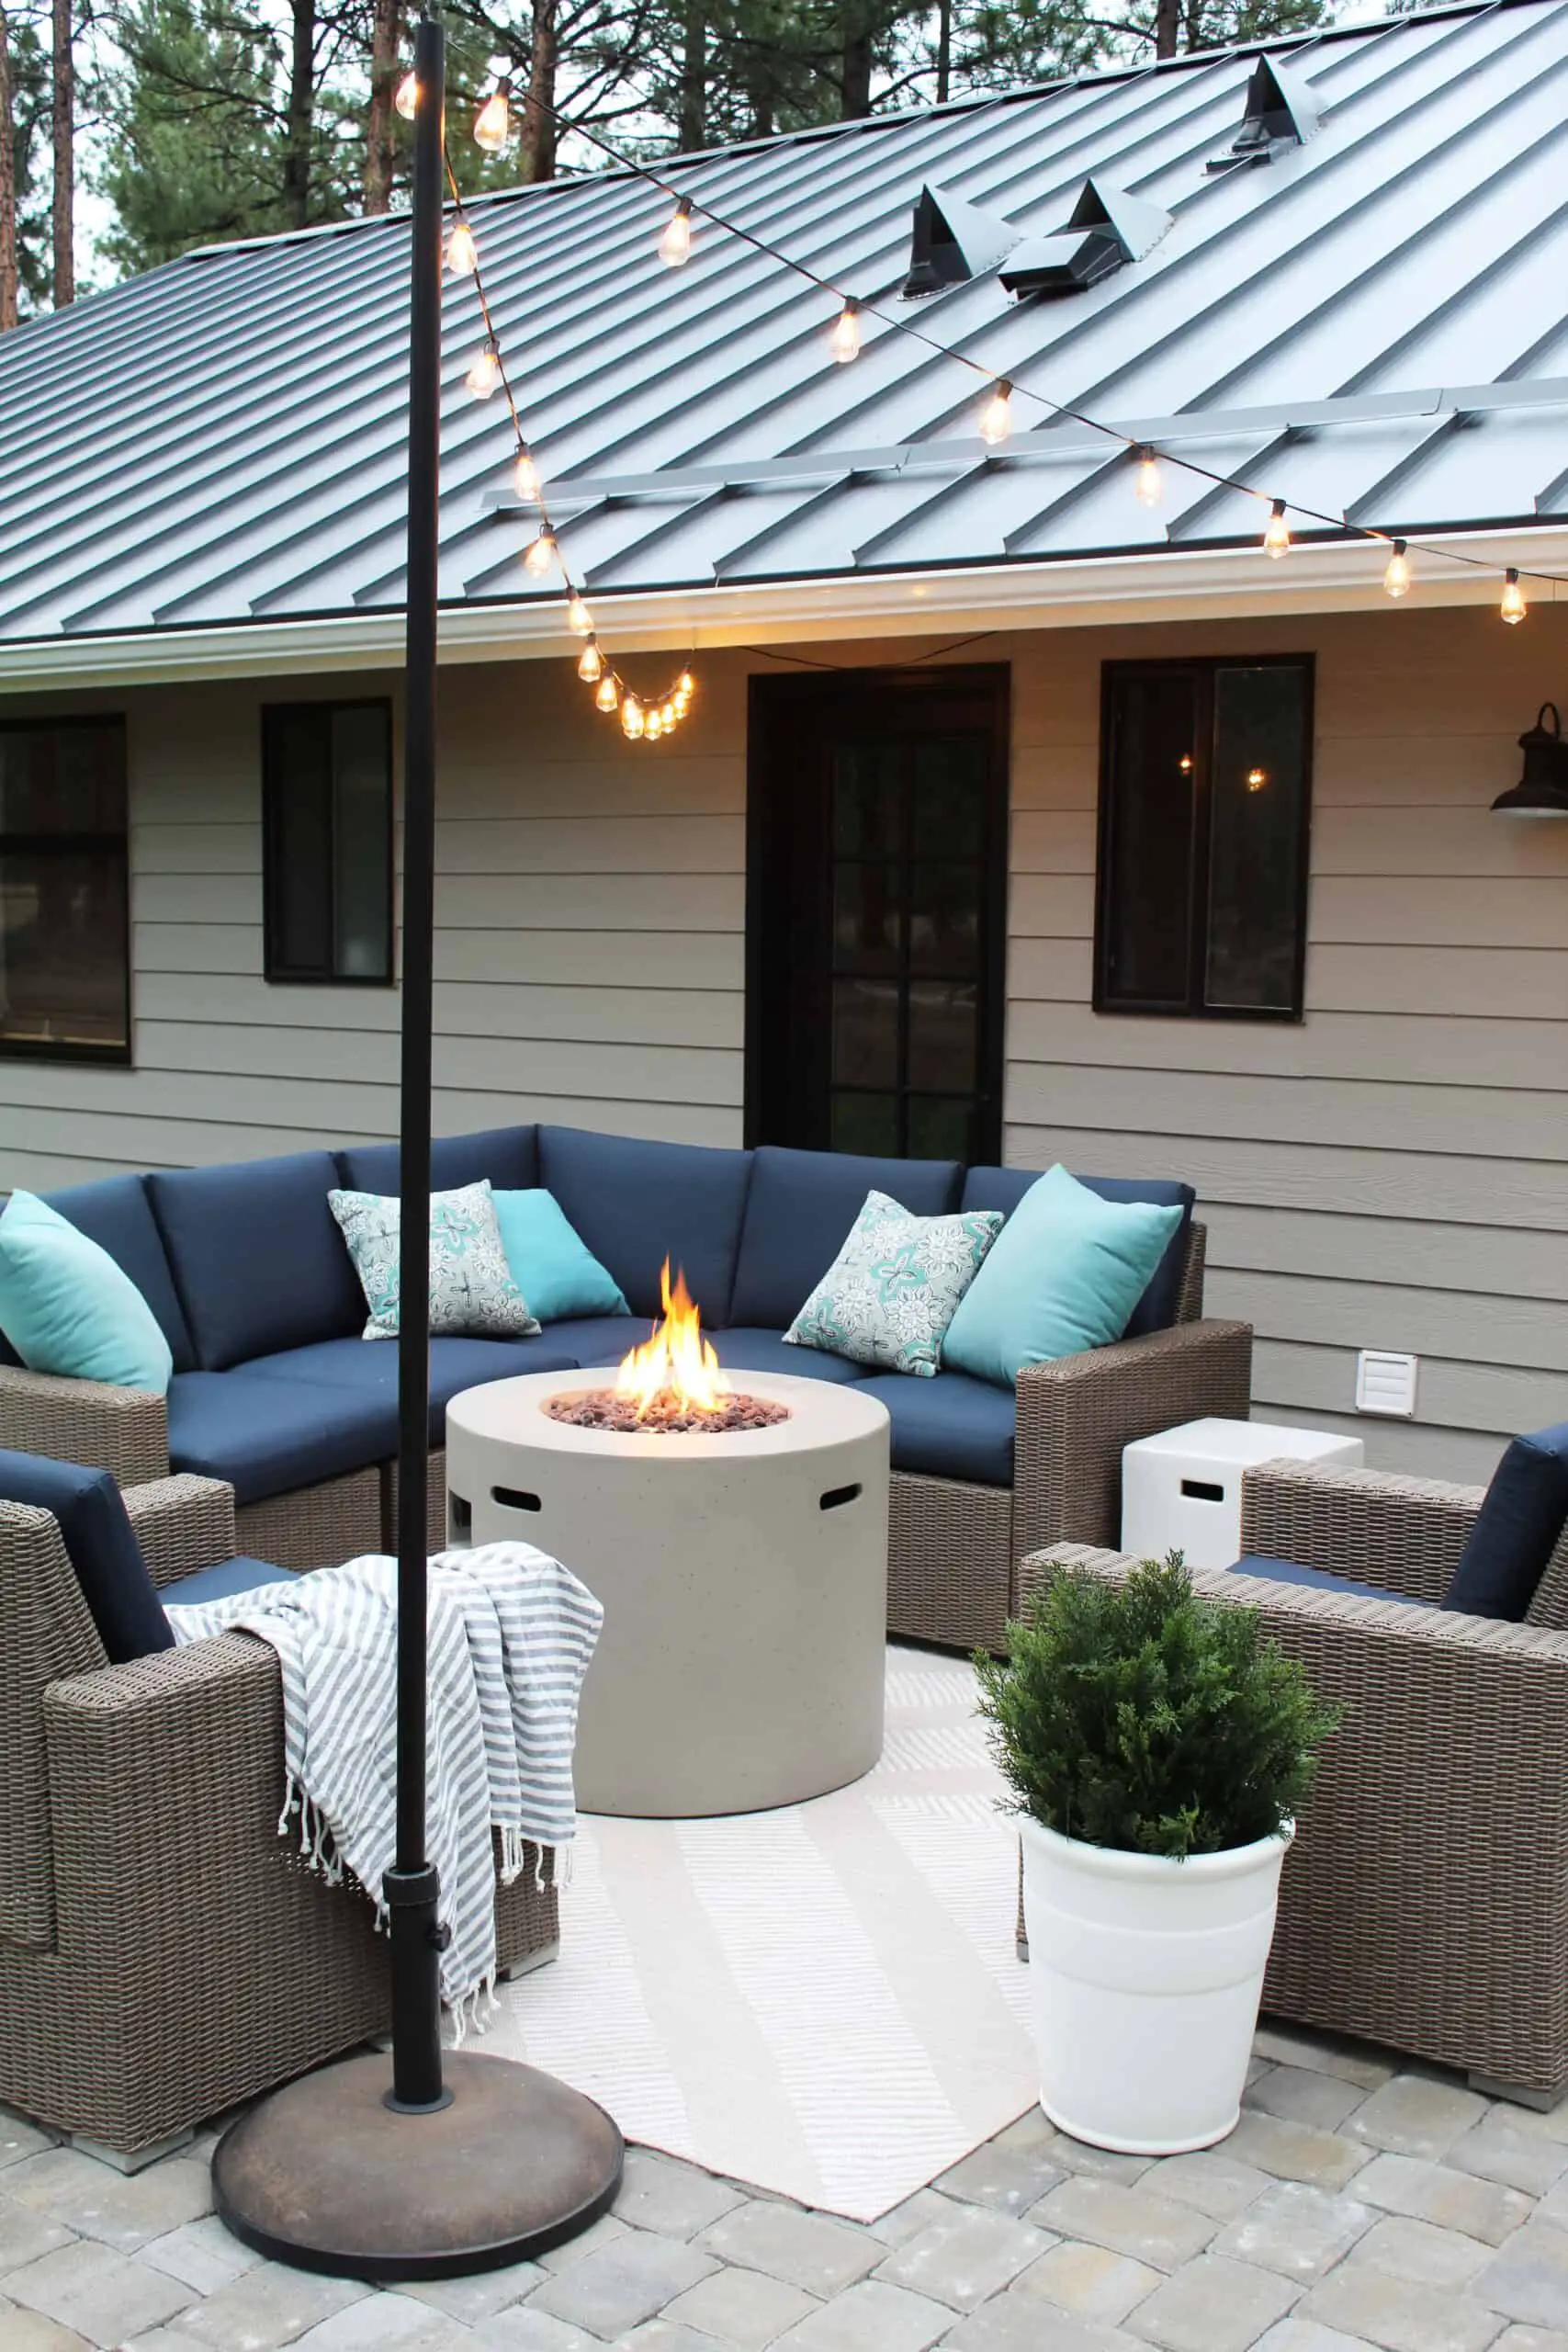 how to add string lights to your patio, target wicker outdoor furniture set, round cement fire pit